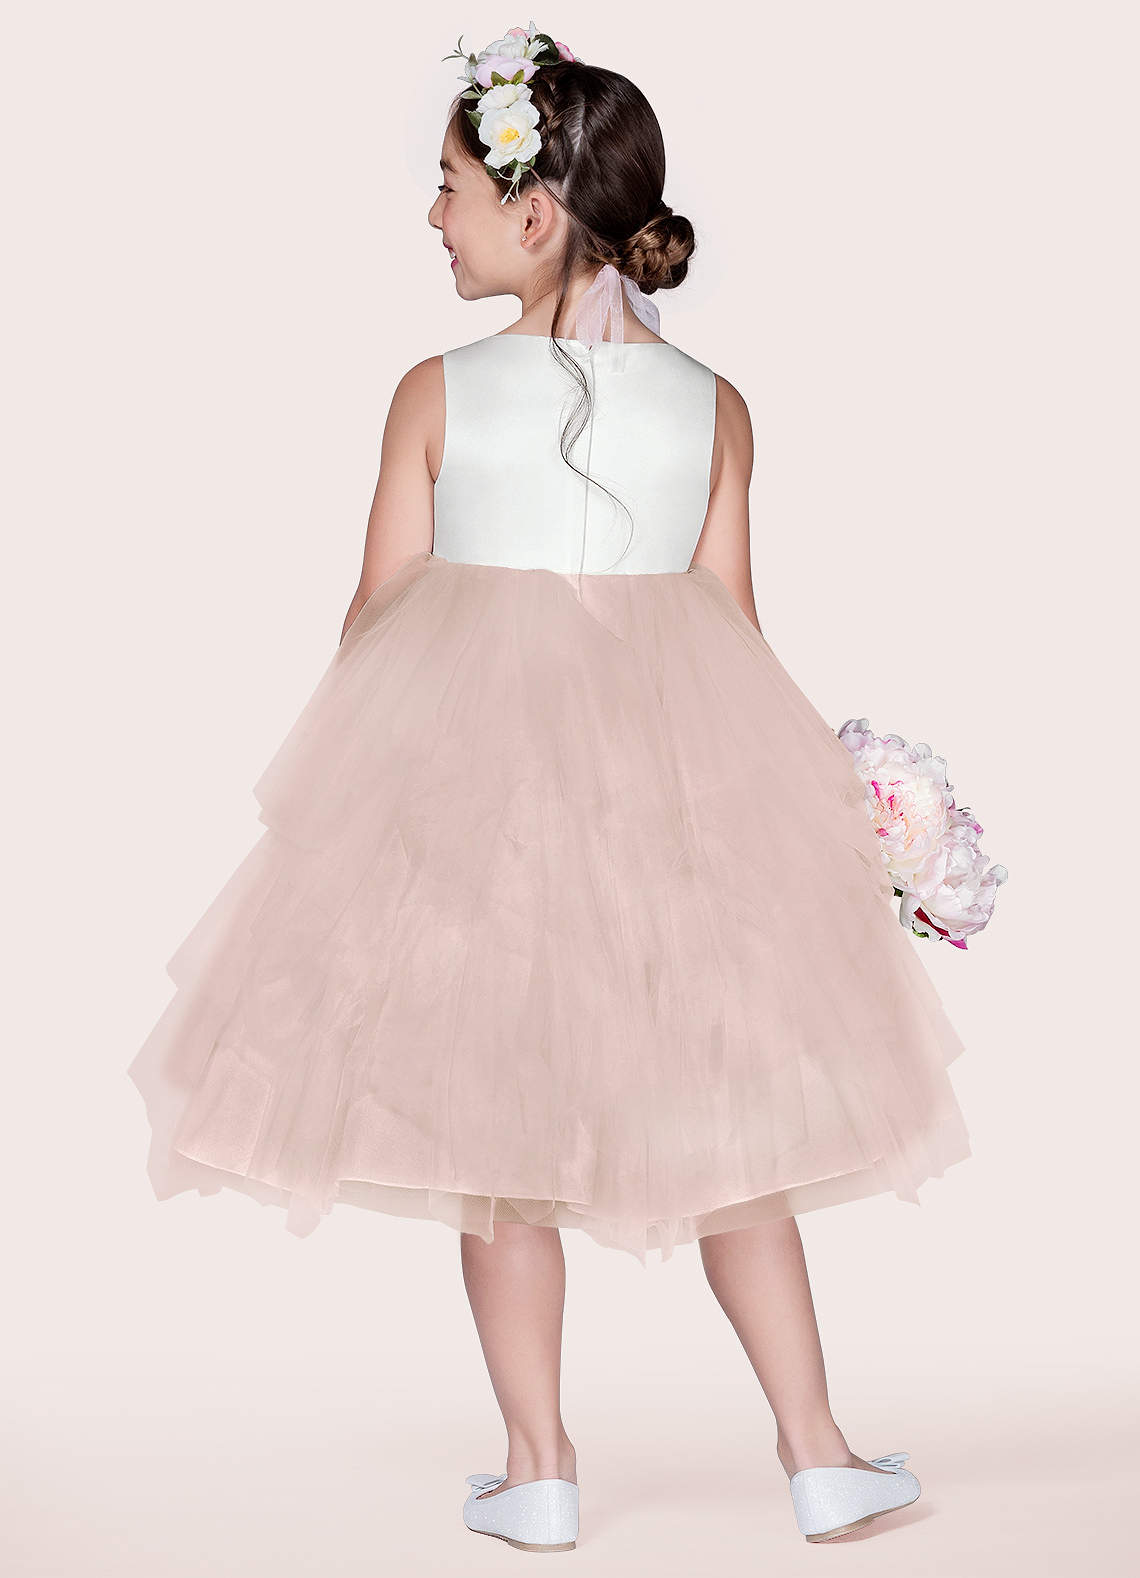 Azazie Redondo Flower Girl Dresses Ball-Gown Embroidered Tulle Knee-Length Dress image1